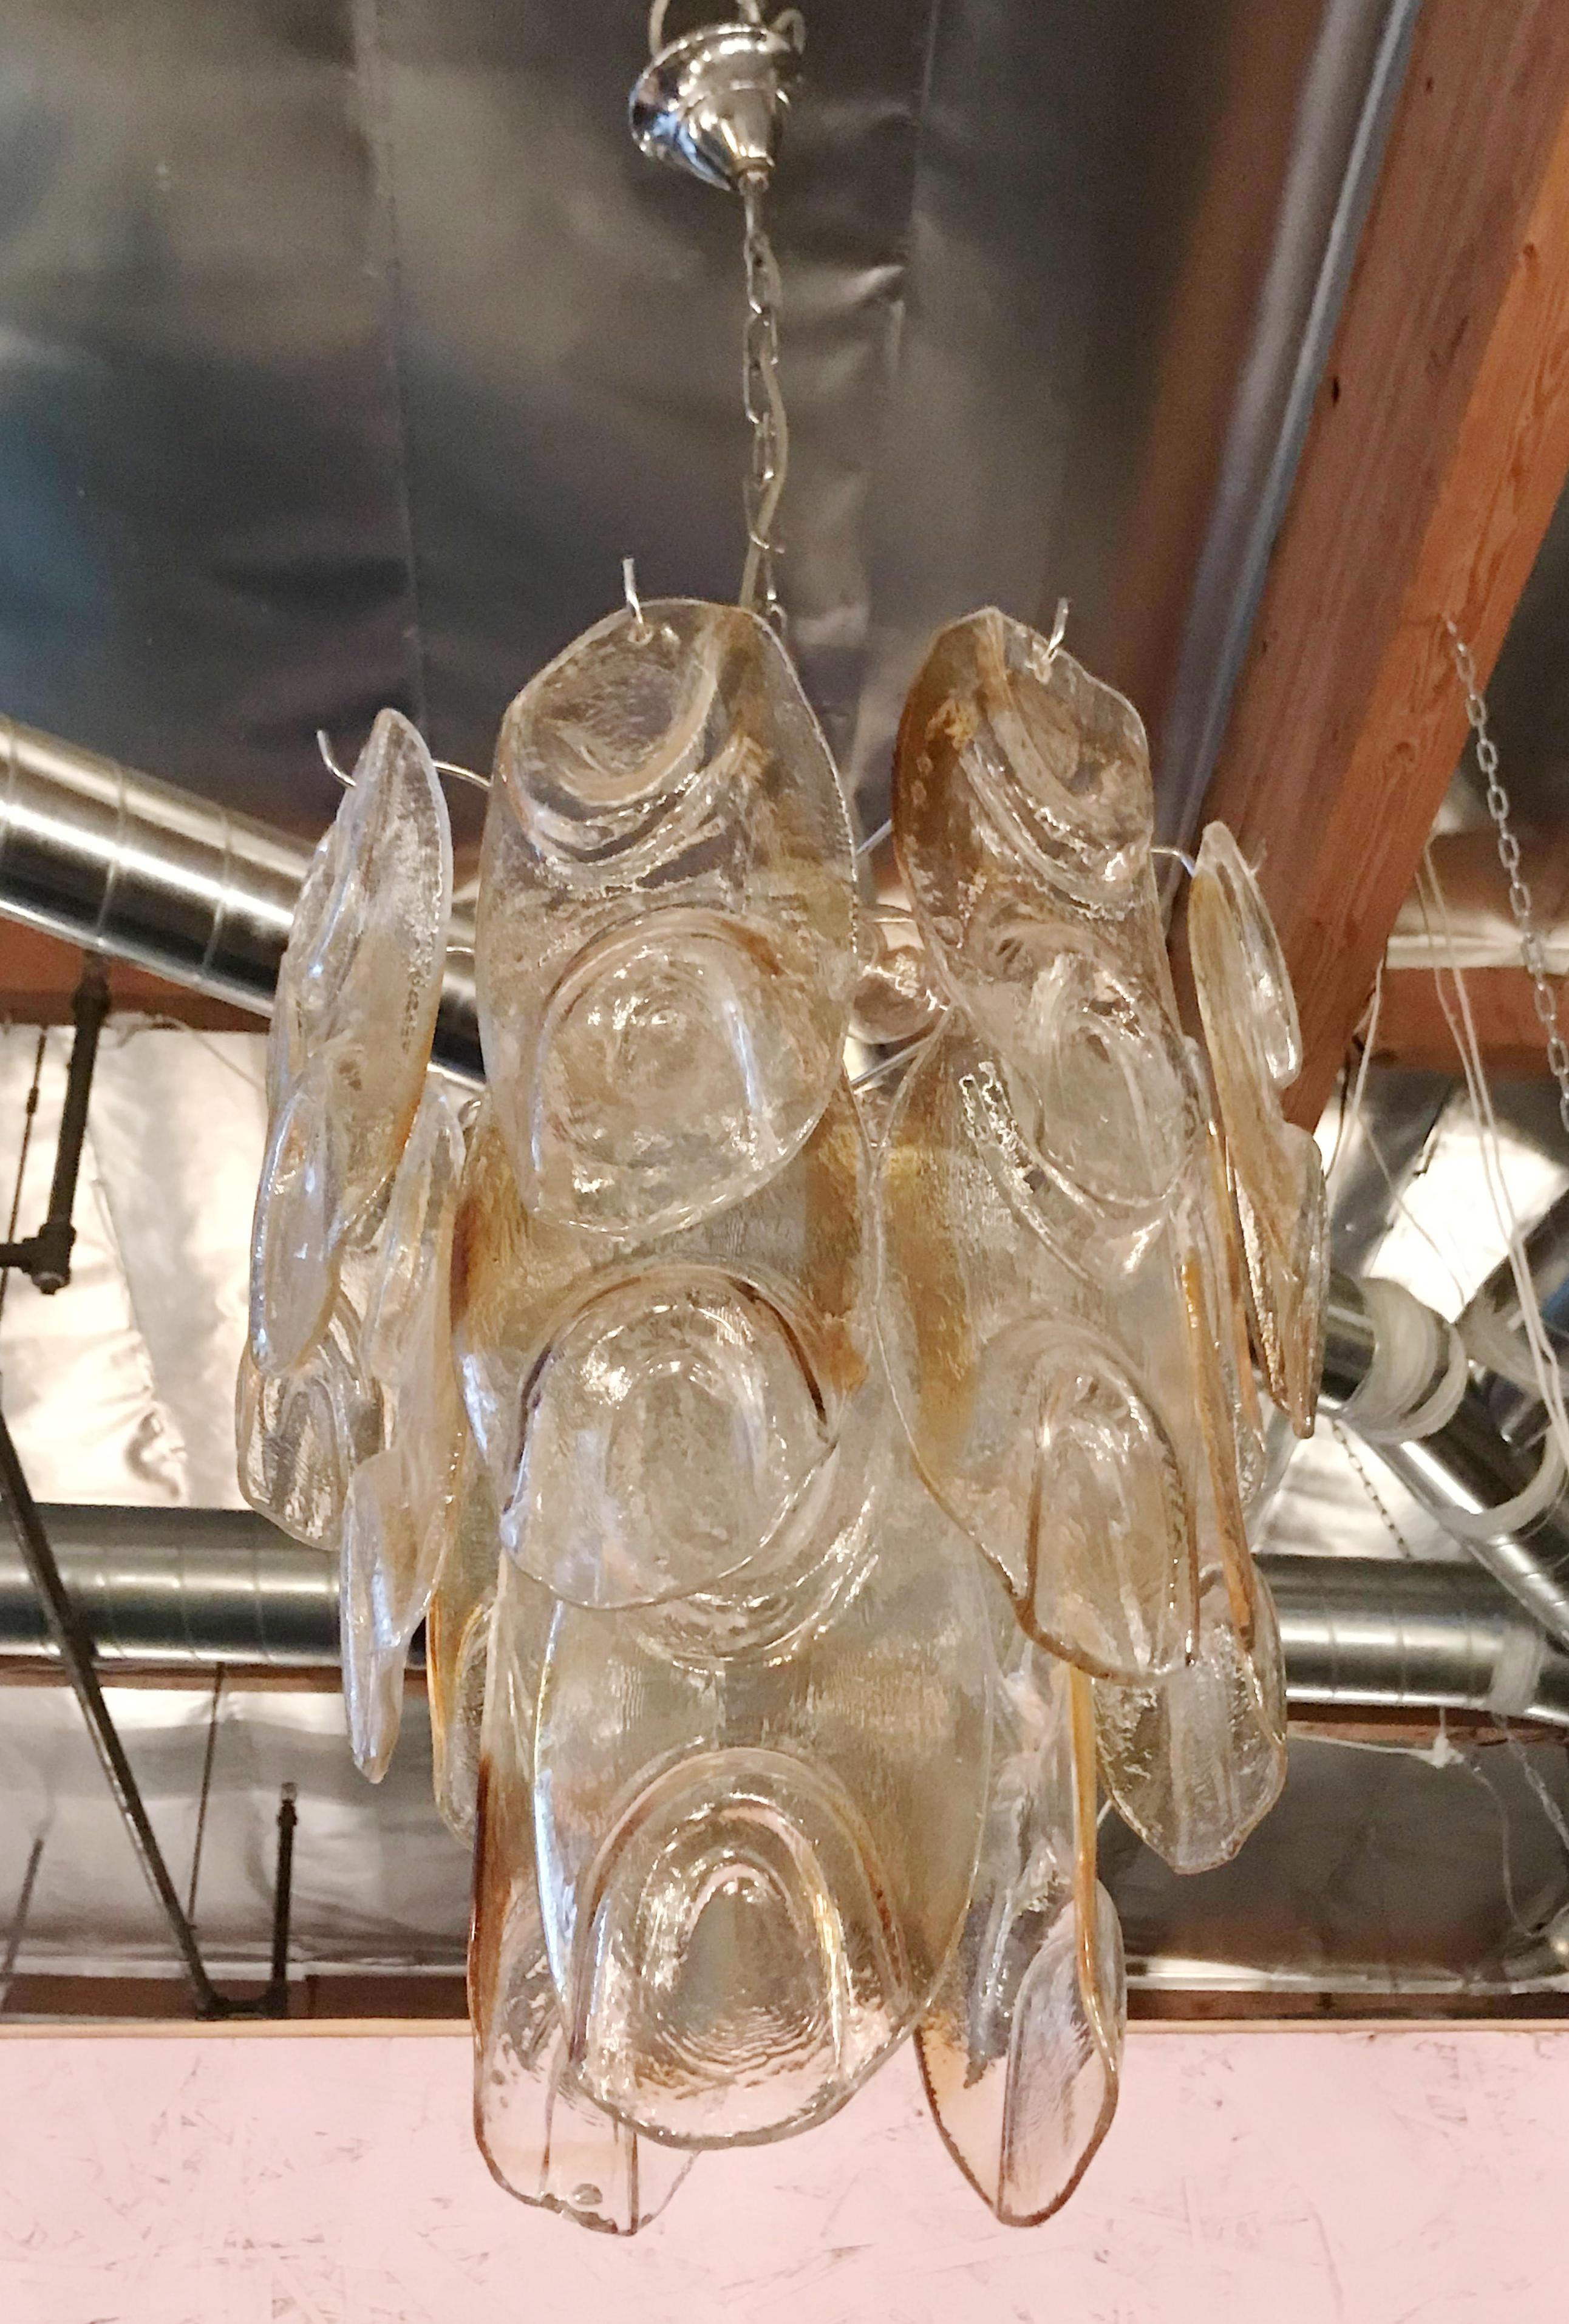 Vintage chandelier with clear and amber Murano glass leaf petals hanging on nickel frame / Designed by Mazzega / Made in Italy, circa 1960s
3 lights / E12 or E14 type / max 40W each
Measures: Diameter 15 inches, height 19 inches plus chain and